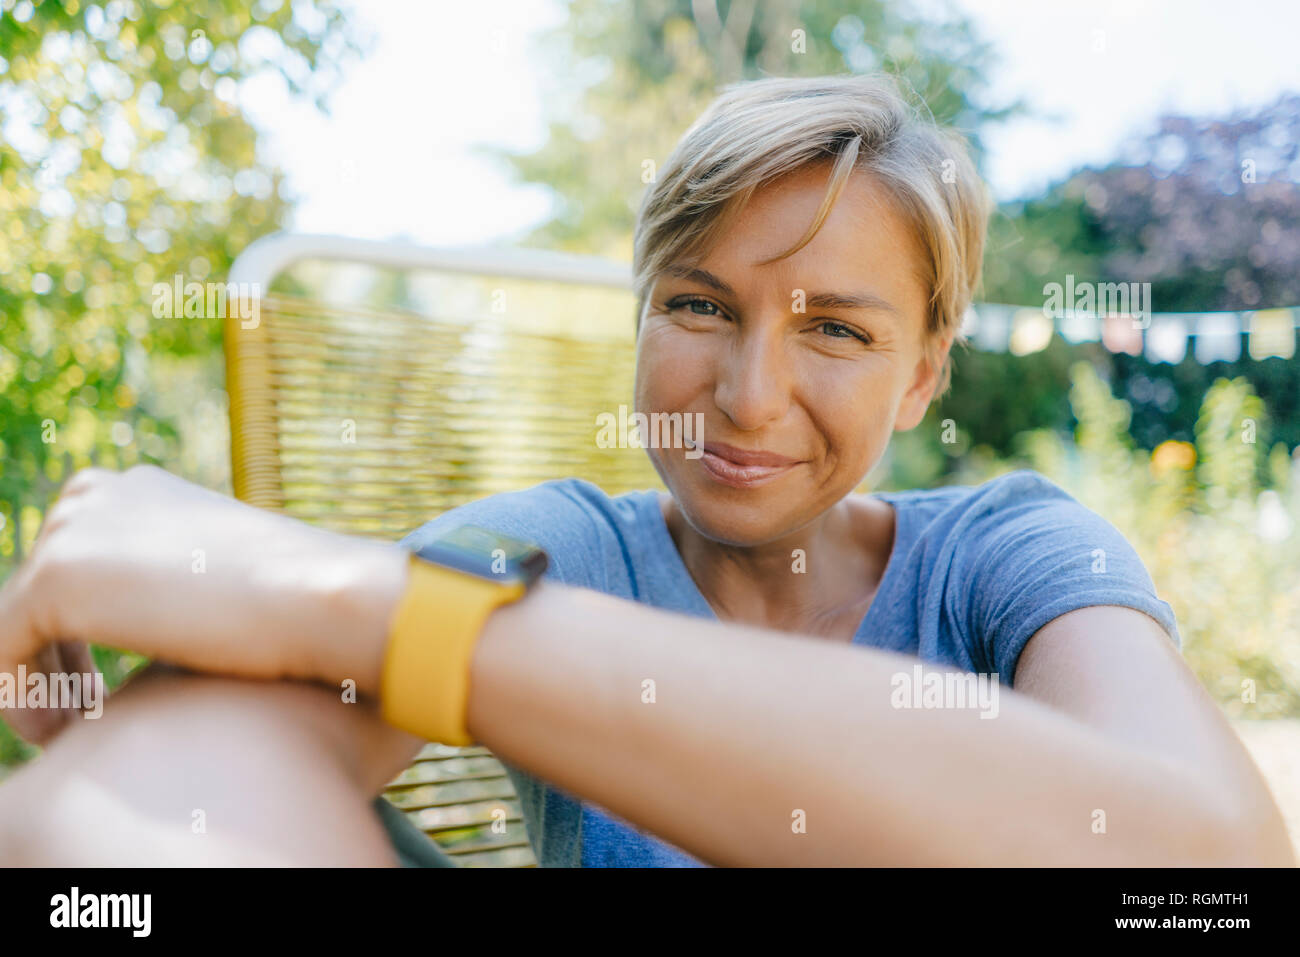 Portrait of smiling woman sitting in garden on chair Stock Photo